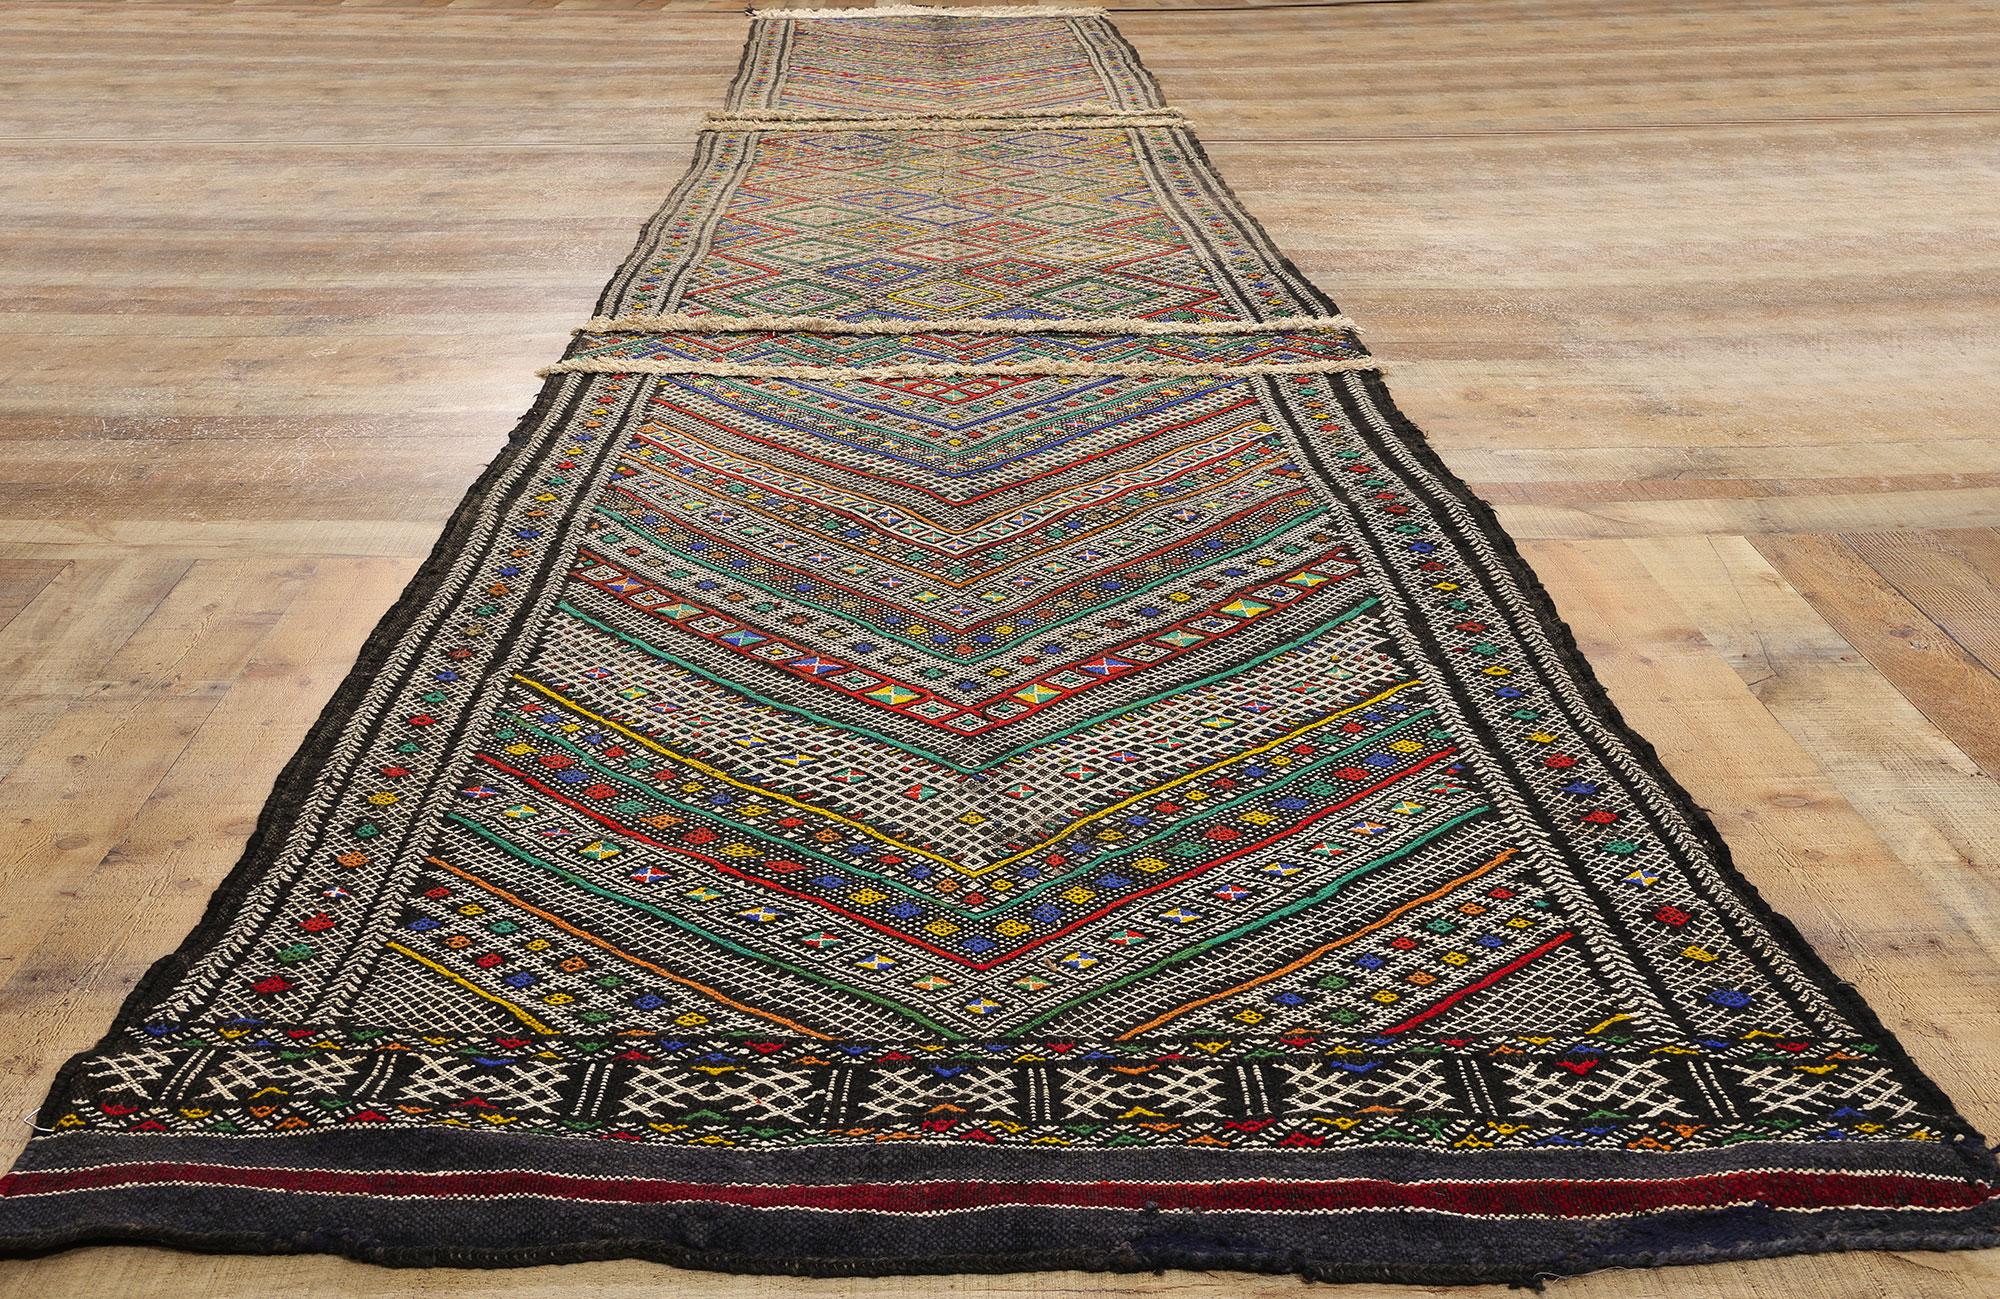 Midcentury Bohemian Vintage Moroccan Zemmour Kilim Berber Rug, 03'09 x 20'01 In Good Condition For Sale In Dallas, TX